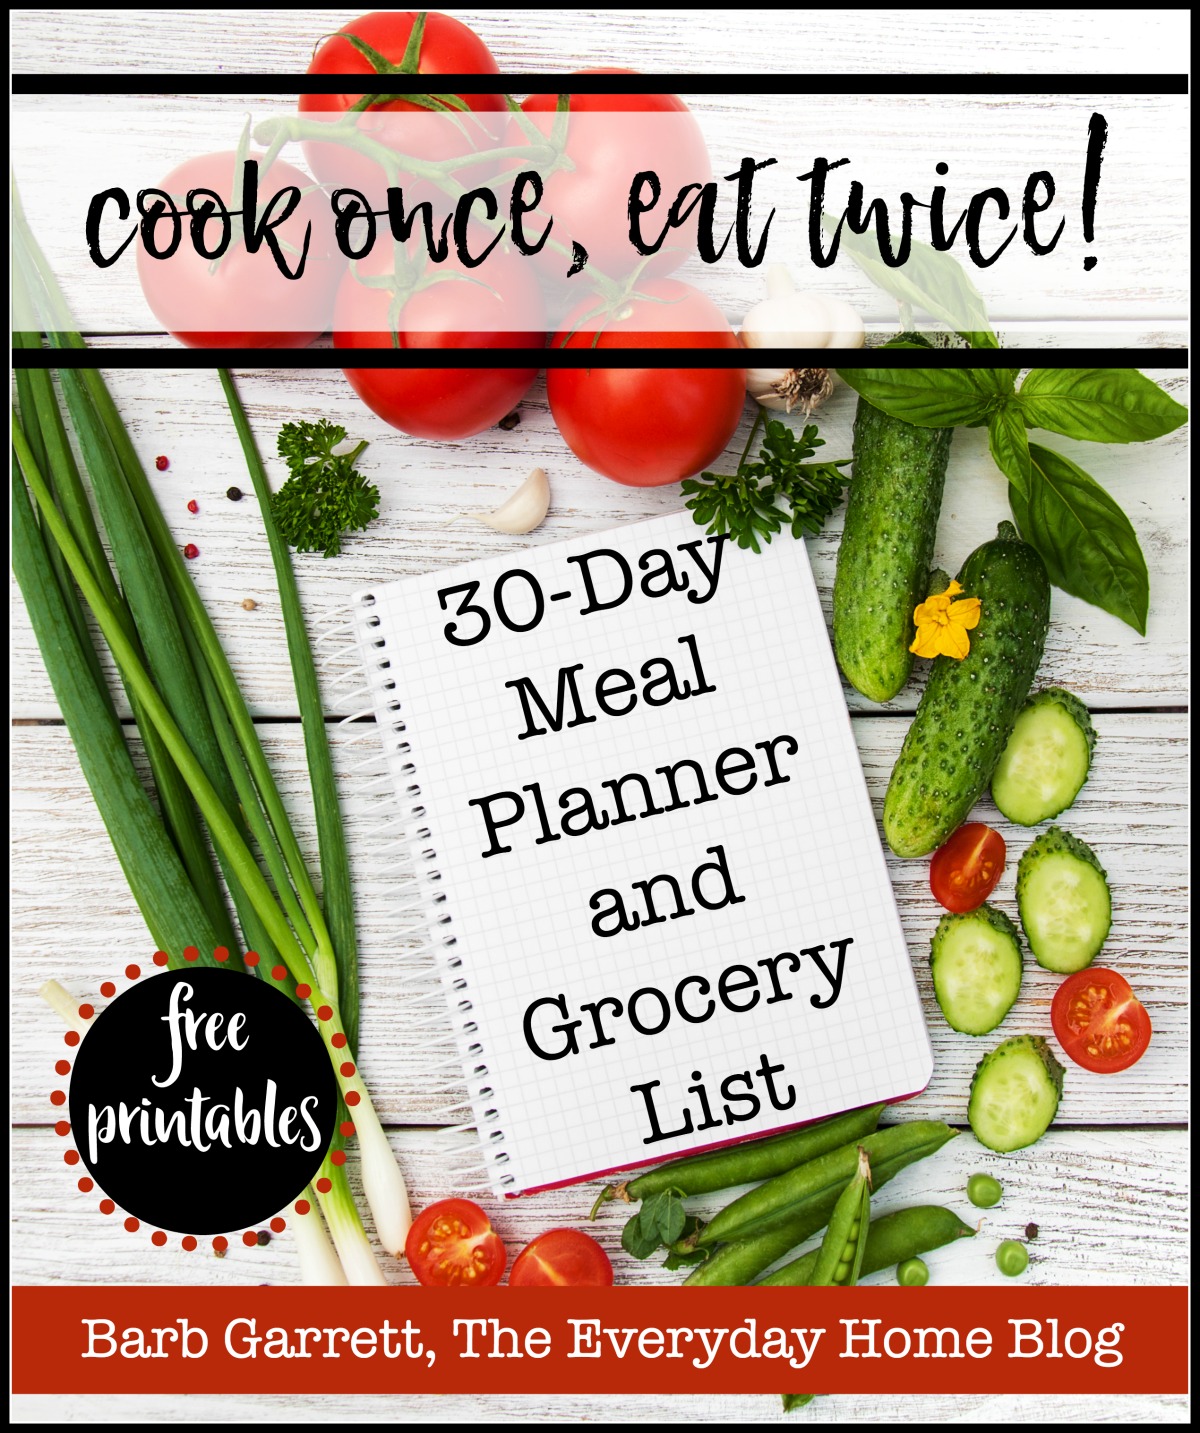 "cook once, eat twice!" ebook featuring 30-Days of Recipes and Meal Ideas plus a Complete Grocery List Planner and Printables | The Everyday Home | www.everydayhomeblog.com